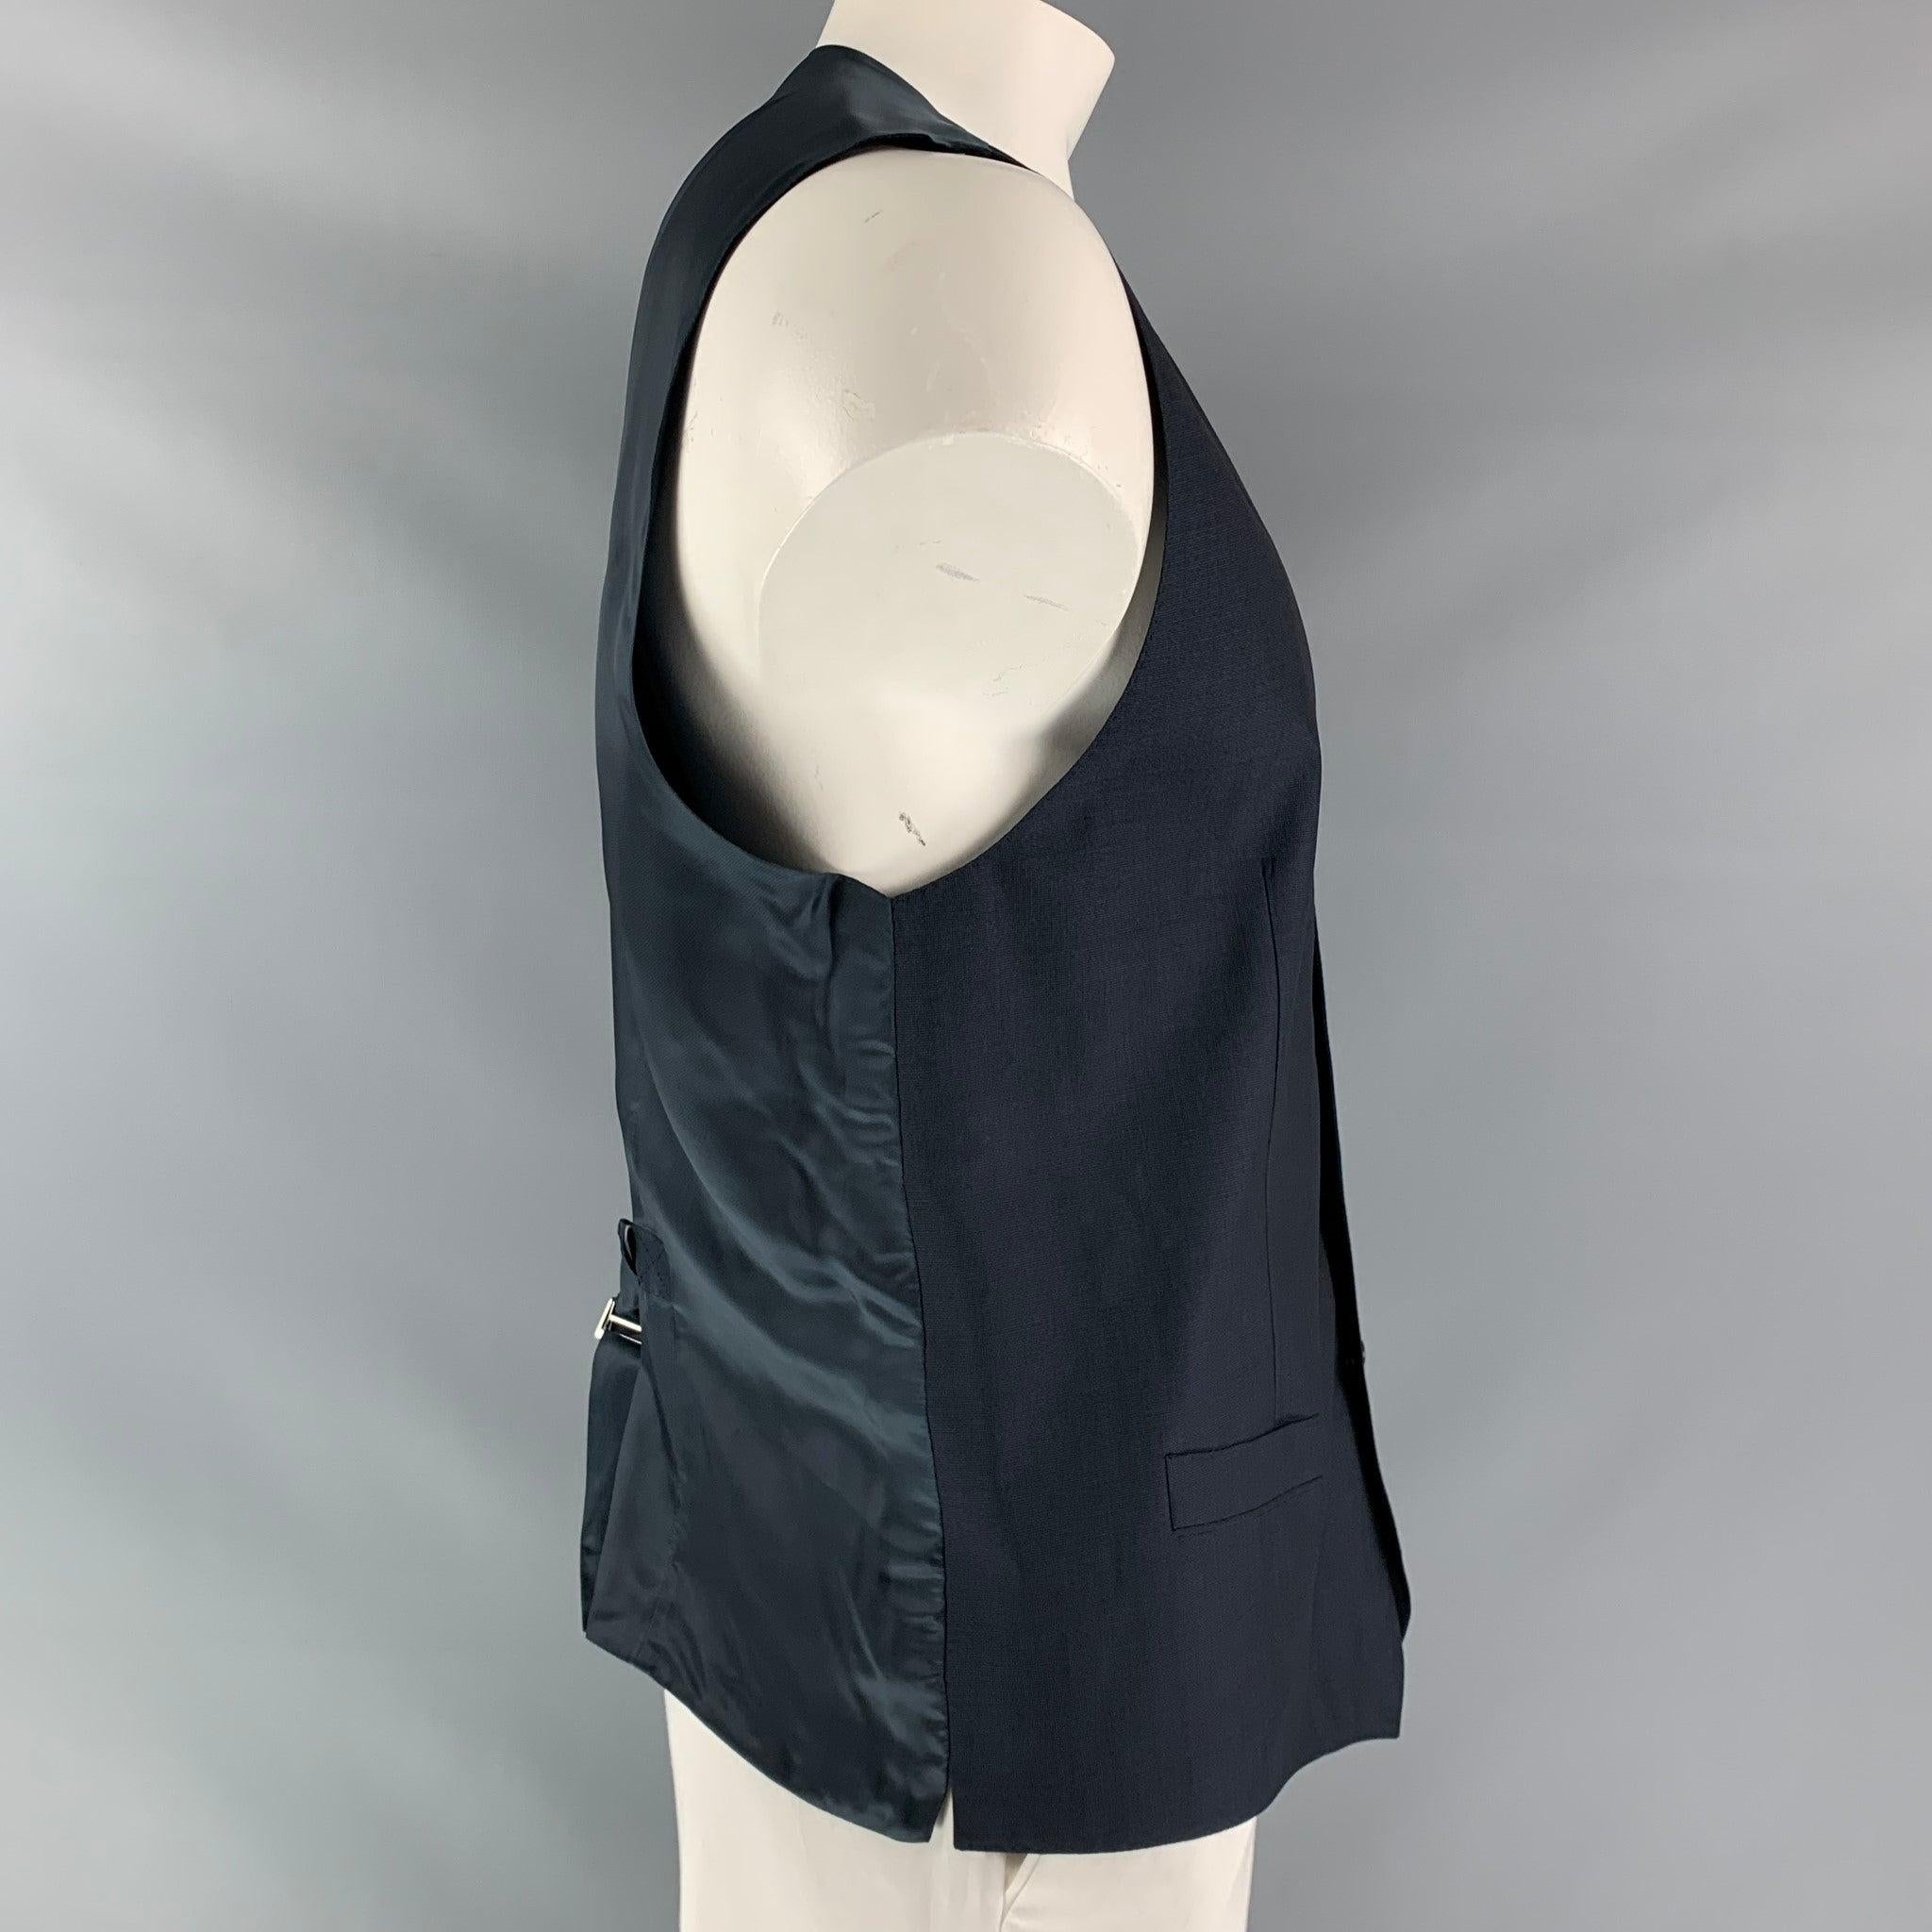 DOLCE & GABBANA dress vest comes in a navy mohair and wool fabric, full lined featuring V-neck, welt pockets, five buttons down closure, navy viscose fabric back and adjustable sliding belt. Made in Italy.Excellent Pre-Owned Condition.  

Marked:  